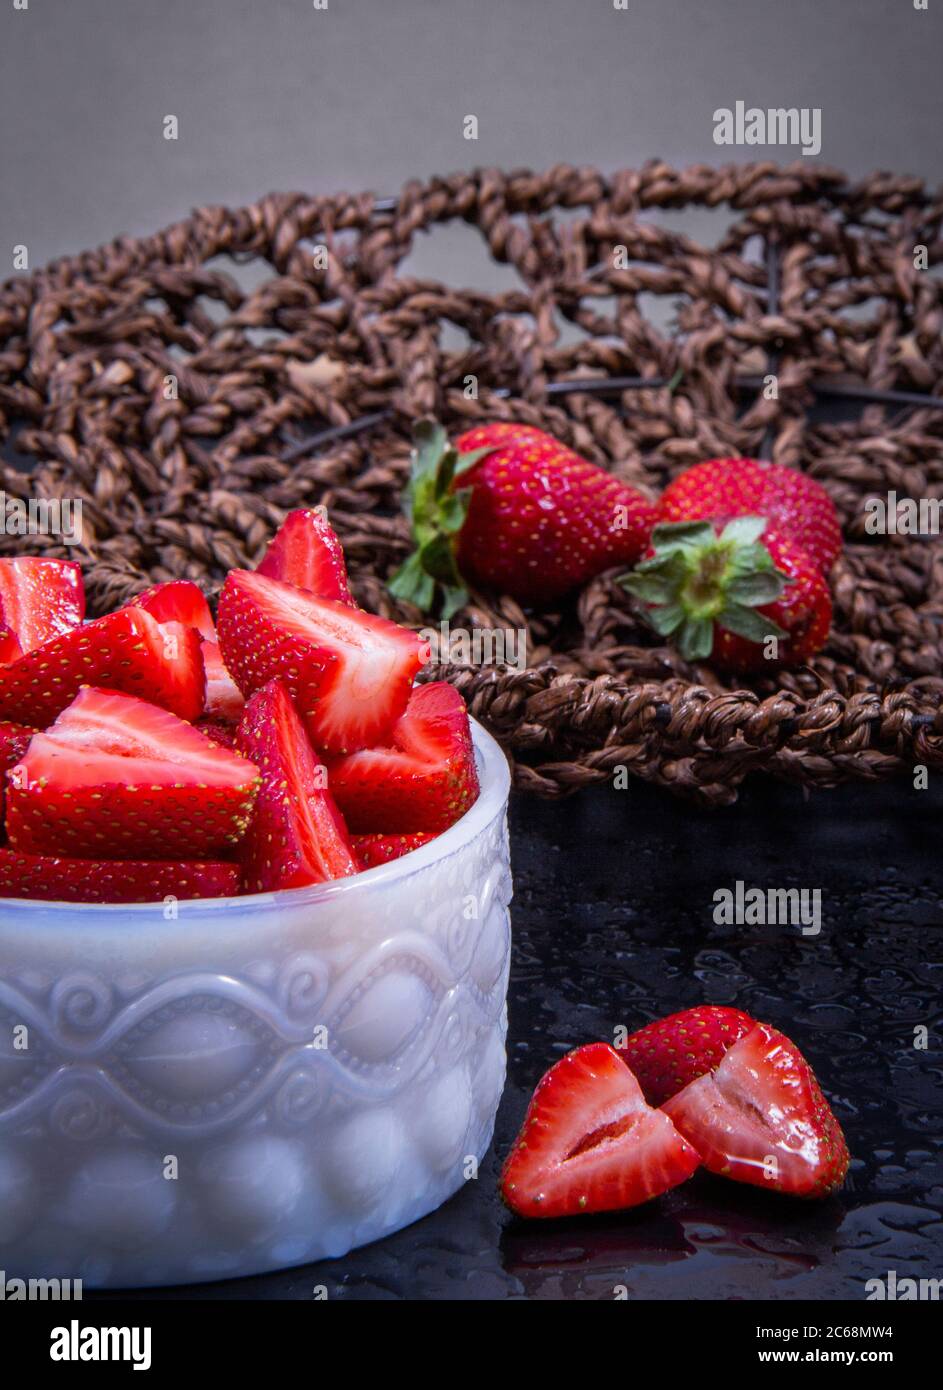 Whole strawberries and some strawberry slices next to each other from a close angle of view. Stock Photo